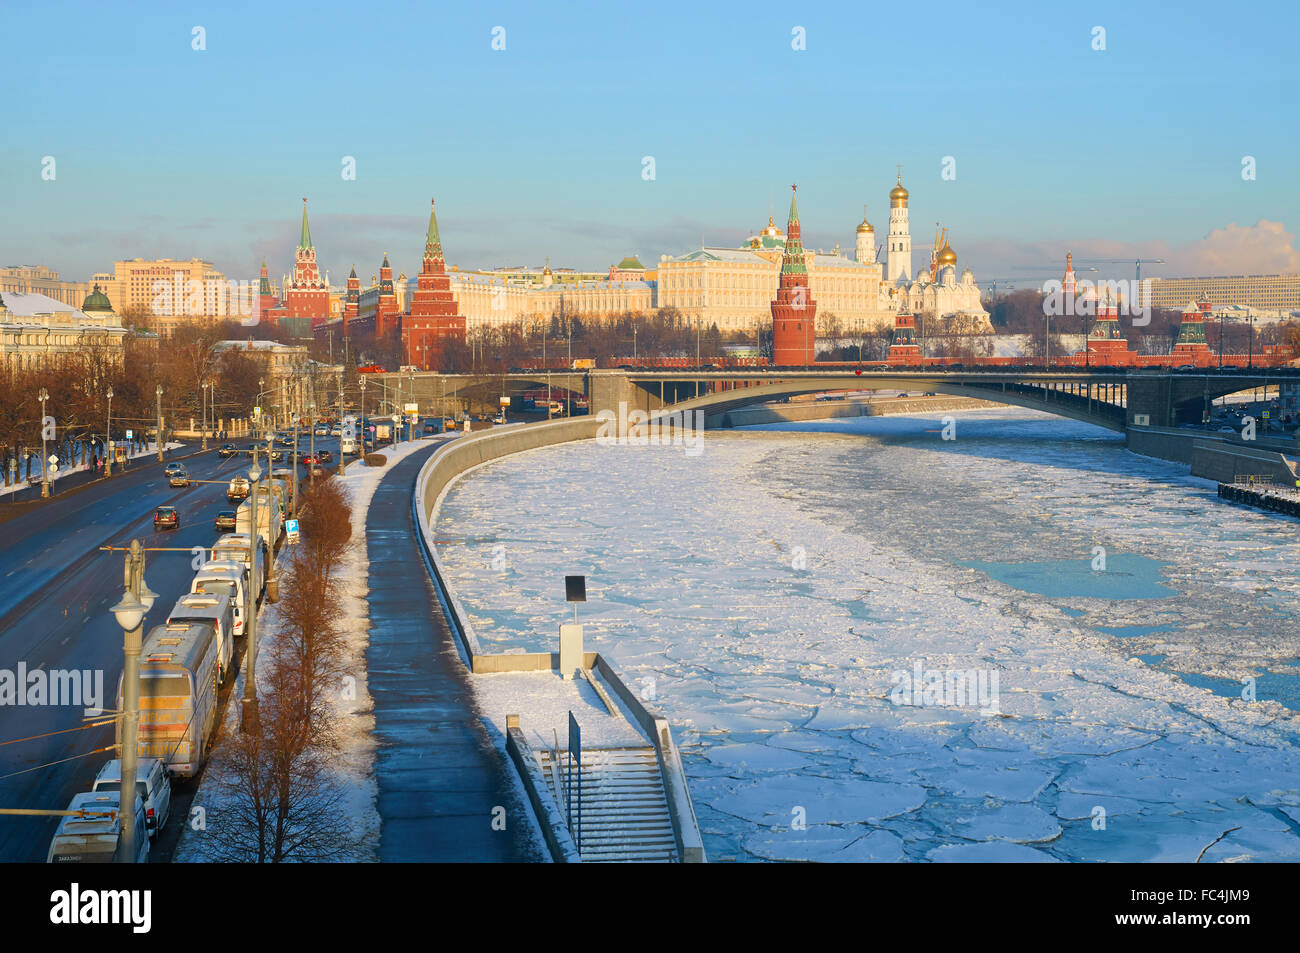 MOSCOW, RUSSIA - JANUARY 11, 2016: View of Moscow Kremlin in the winter and Bolshoy Kamenny Bridge Stock Photo